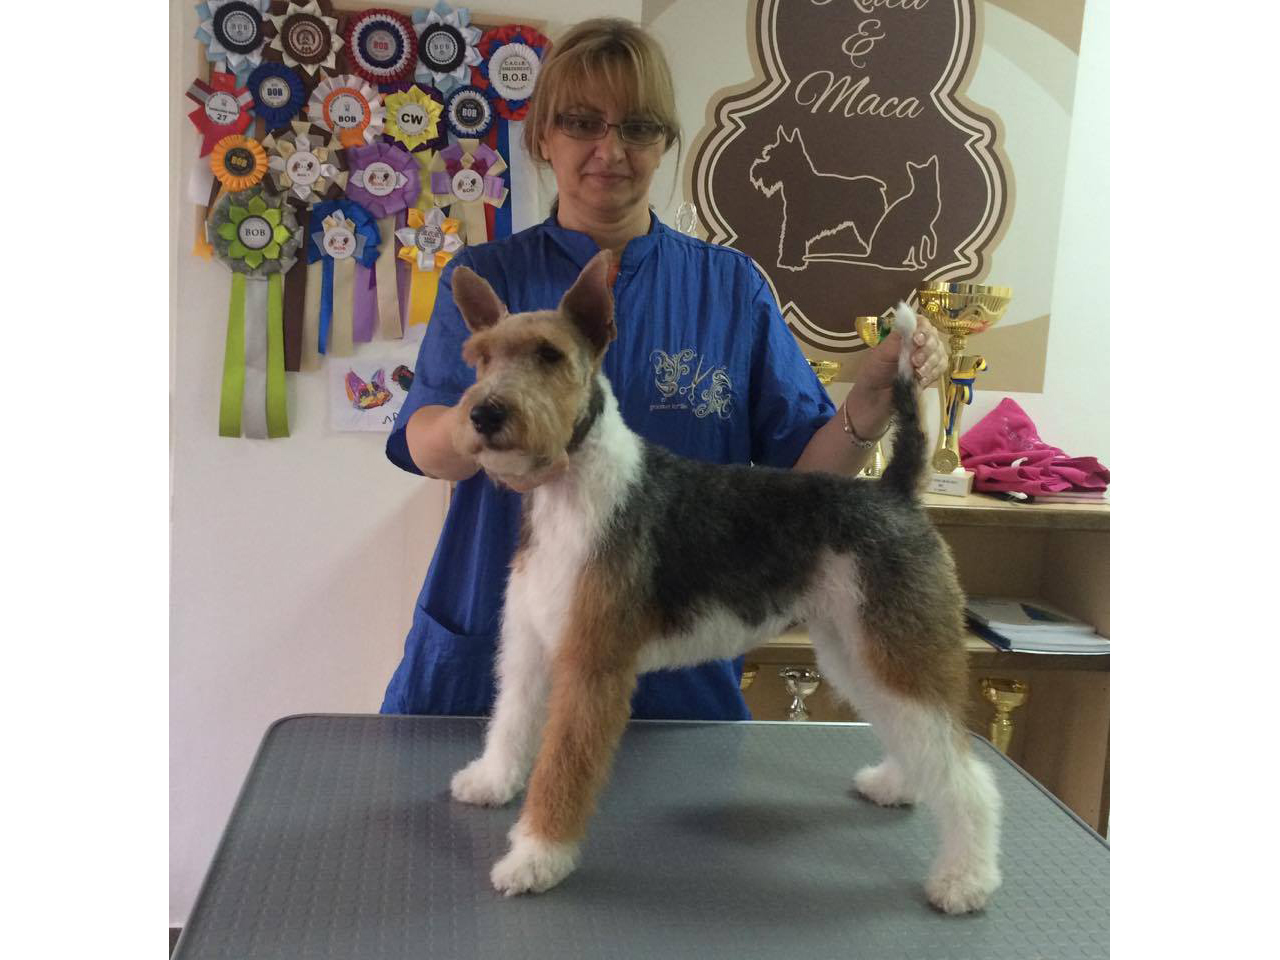 Photo 7 - 01 KUCA I MACA GROOMING SALON FOR DOGS AND CATS AND EDUCATION Pet salon, dog grooming Belgrade